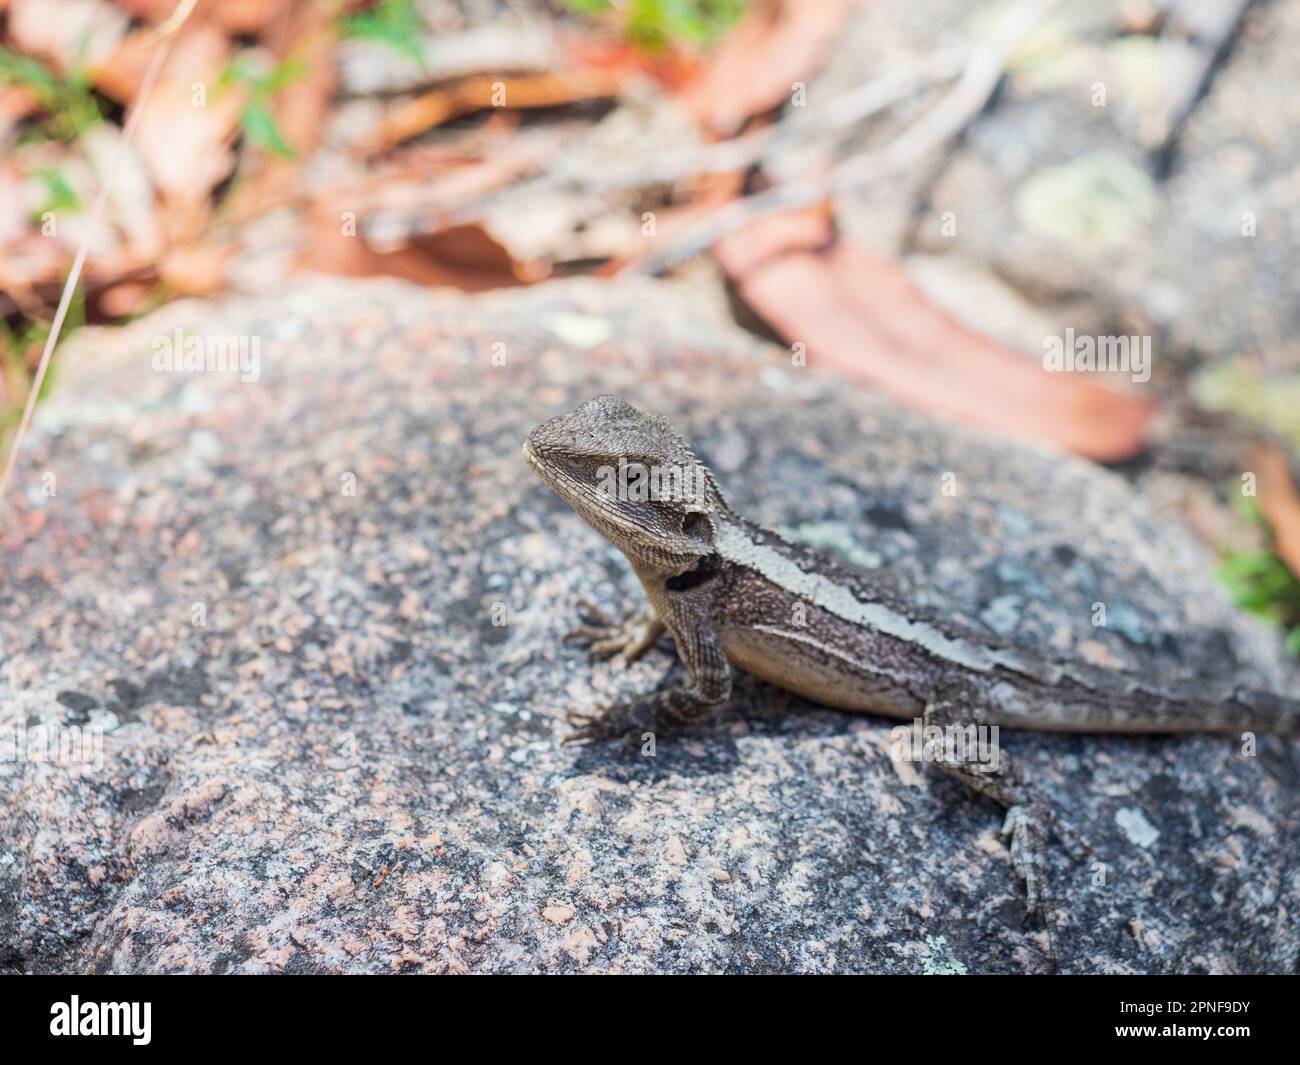 Spotted skink sitting on rock Stock Photo